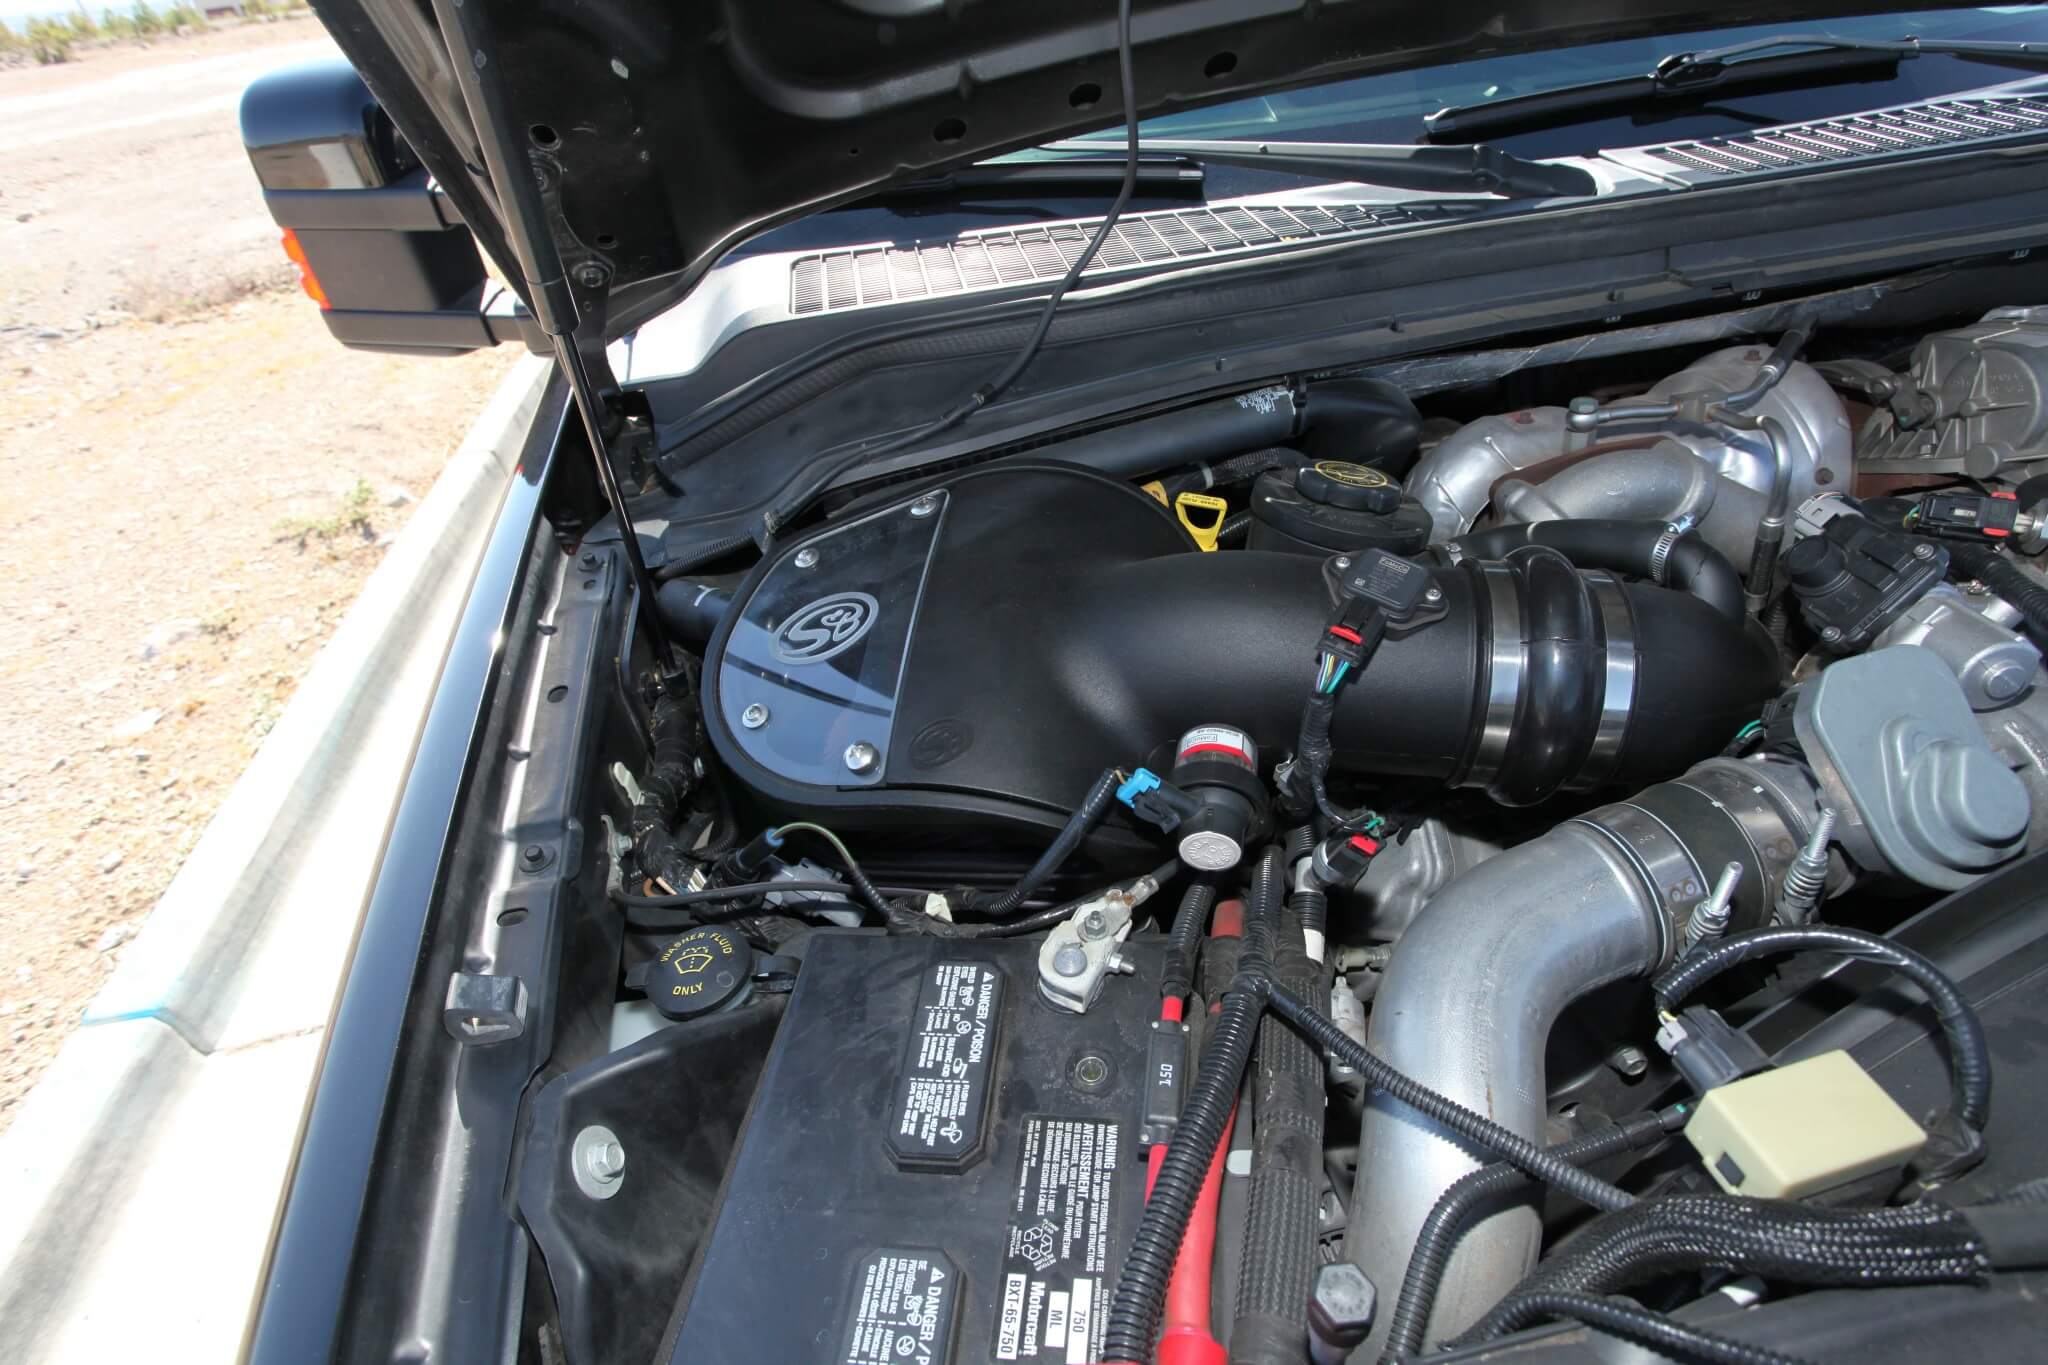 An S&B Cold air Intake system was installed to help improve the engine’s breathing. 